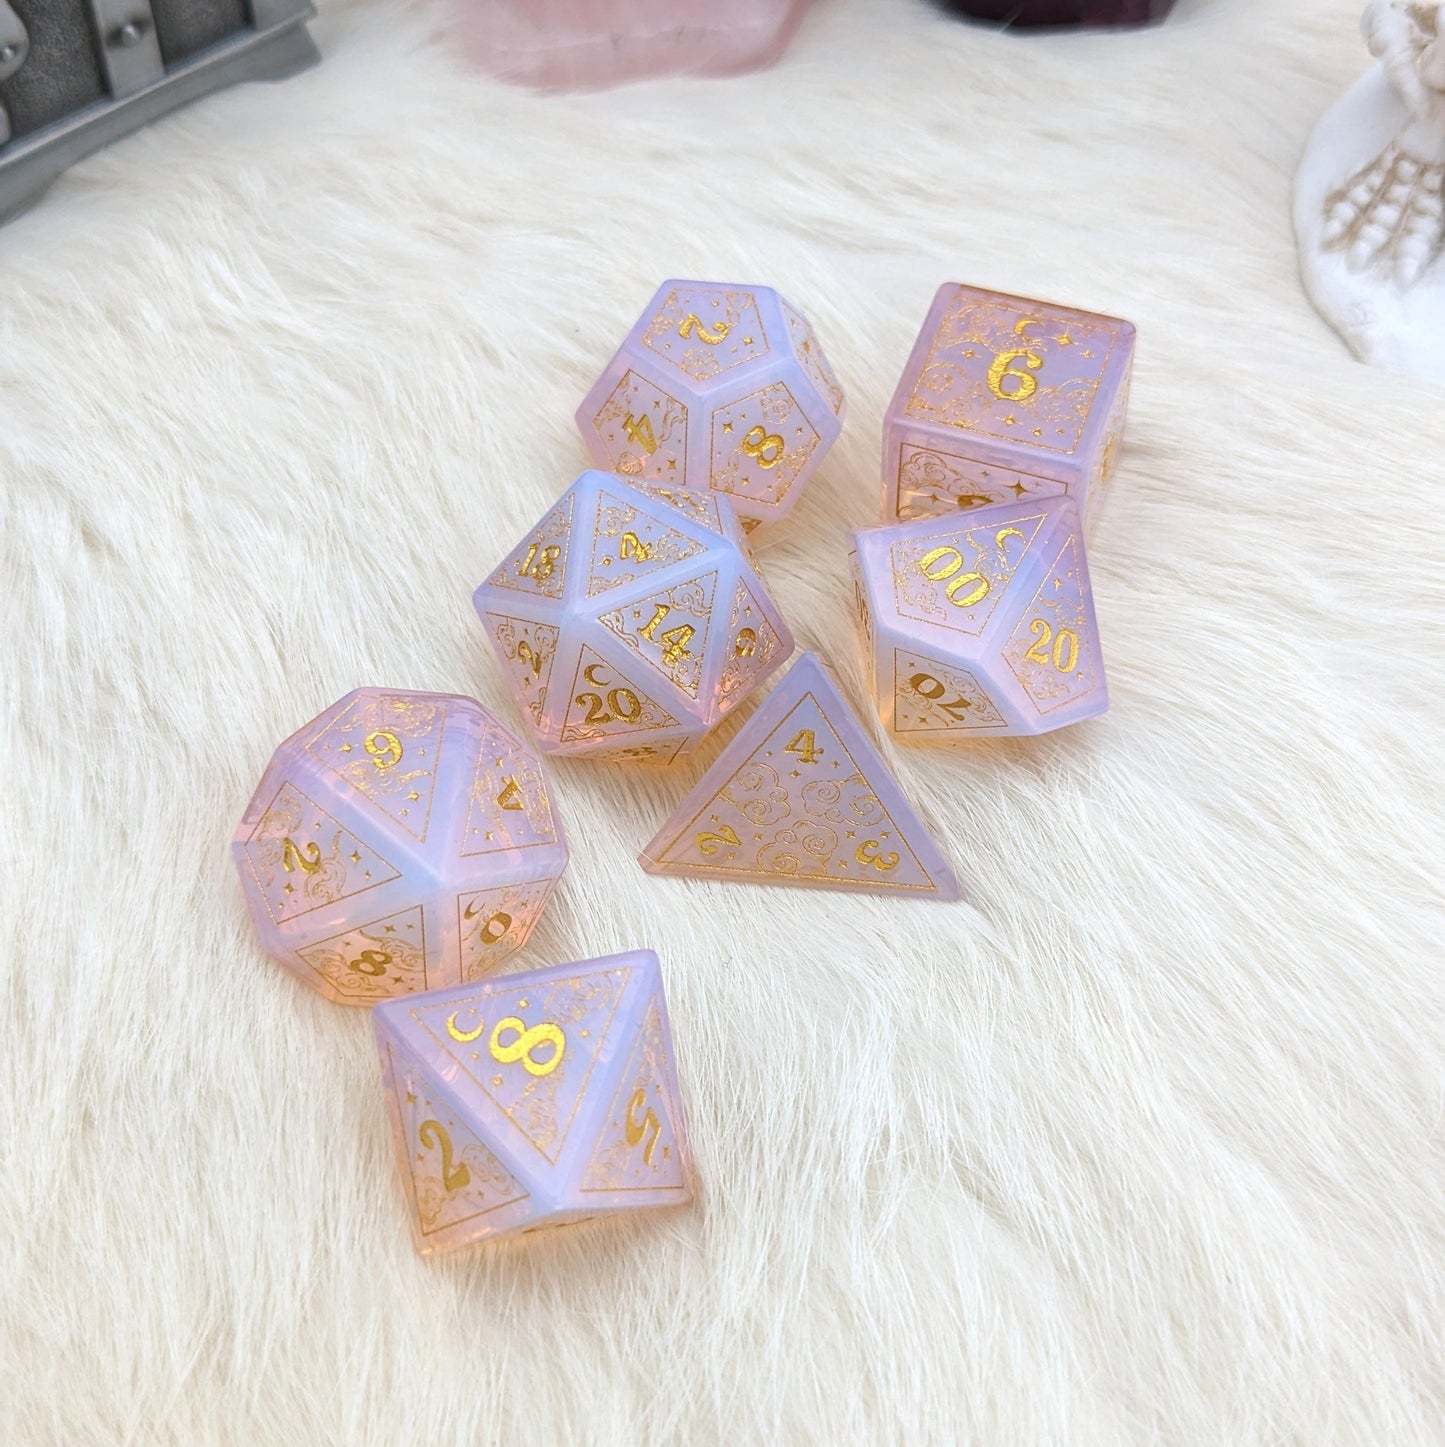 Dreamy Glowing Pink Opalite Dice Set. Cloud and Moon Engraved Glass Dice